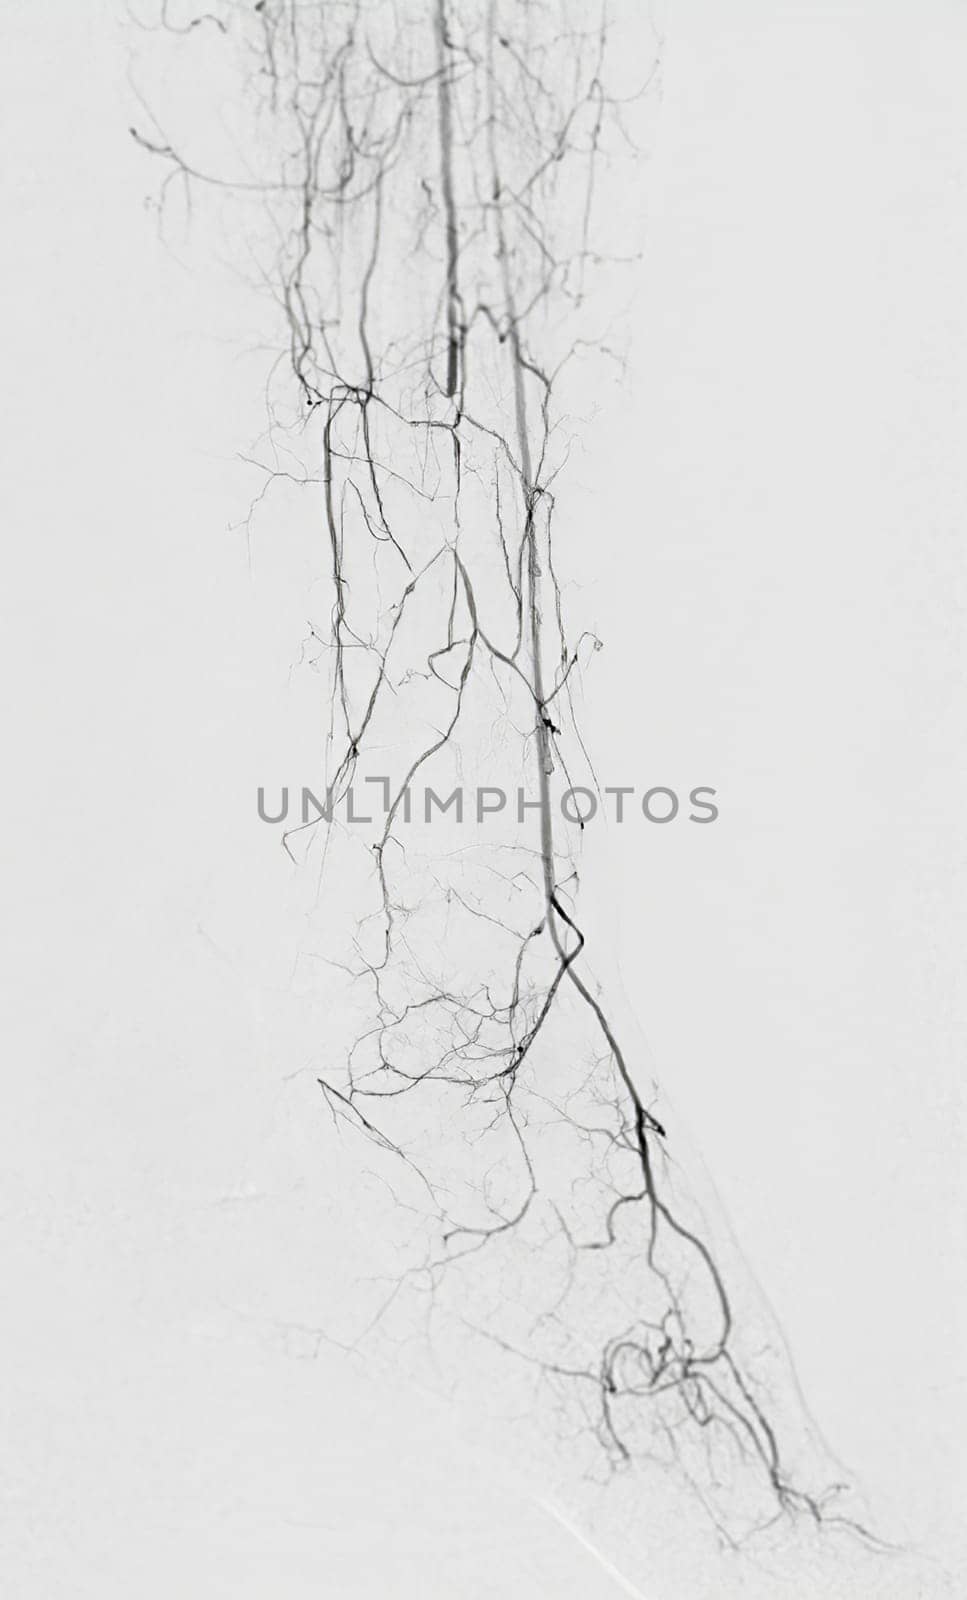 Femoral artery angiogram or angiography at lower extremity area.